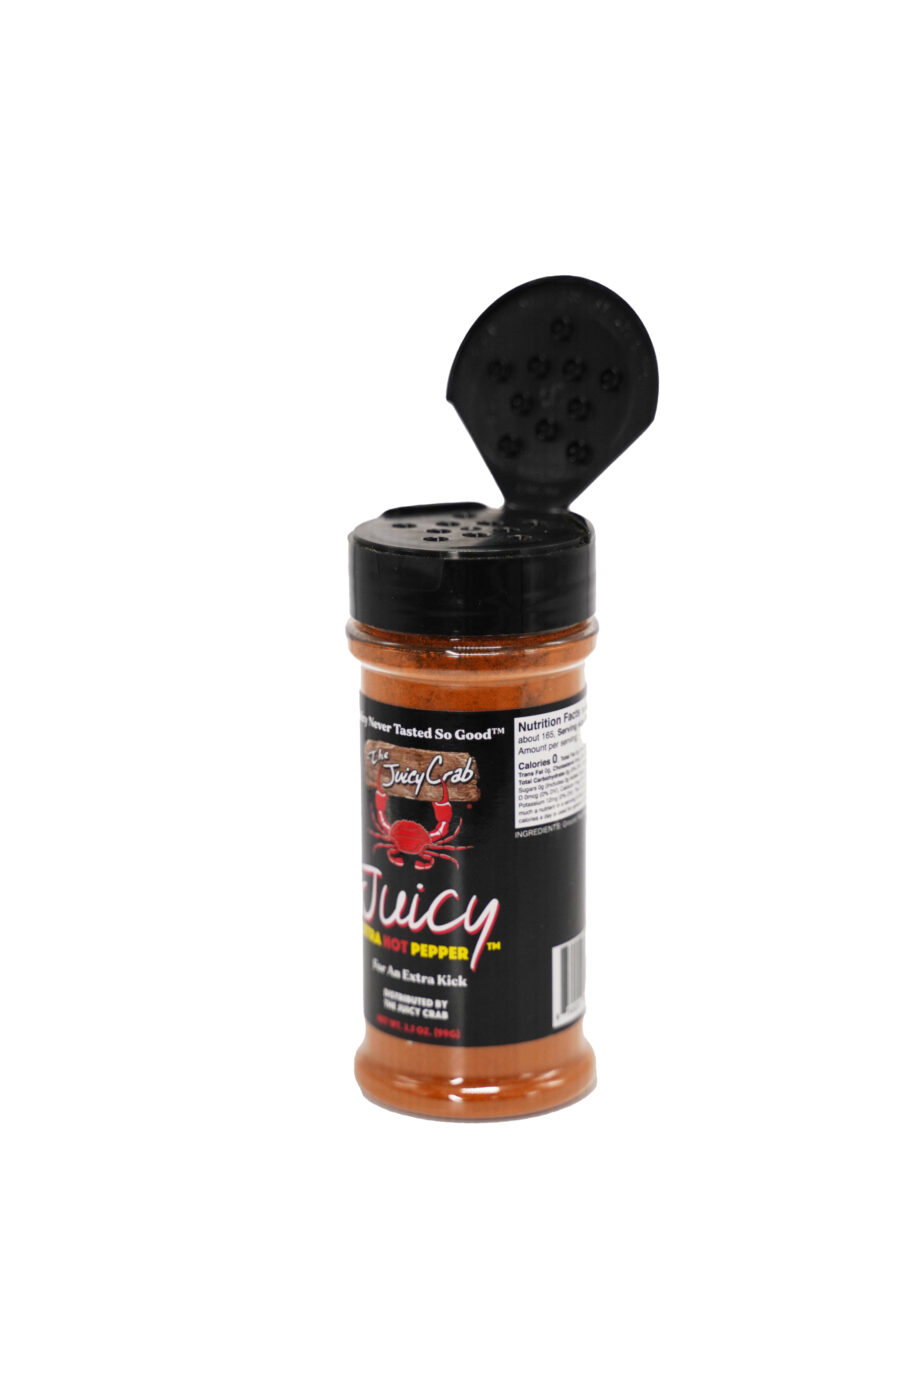 Juicy Special Extra Hot Pepper Powder by The Juicy Crab | 3.5OZ (99g)